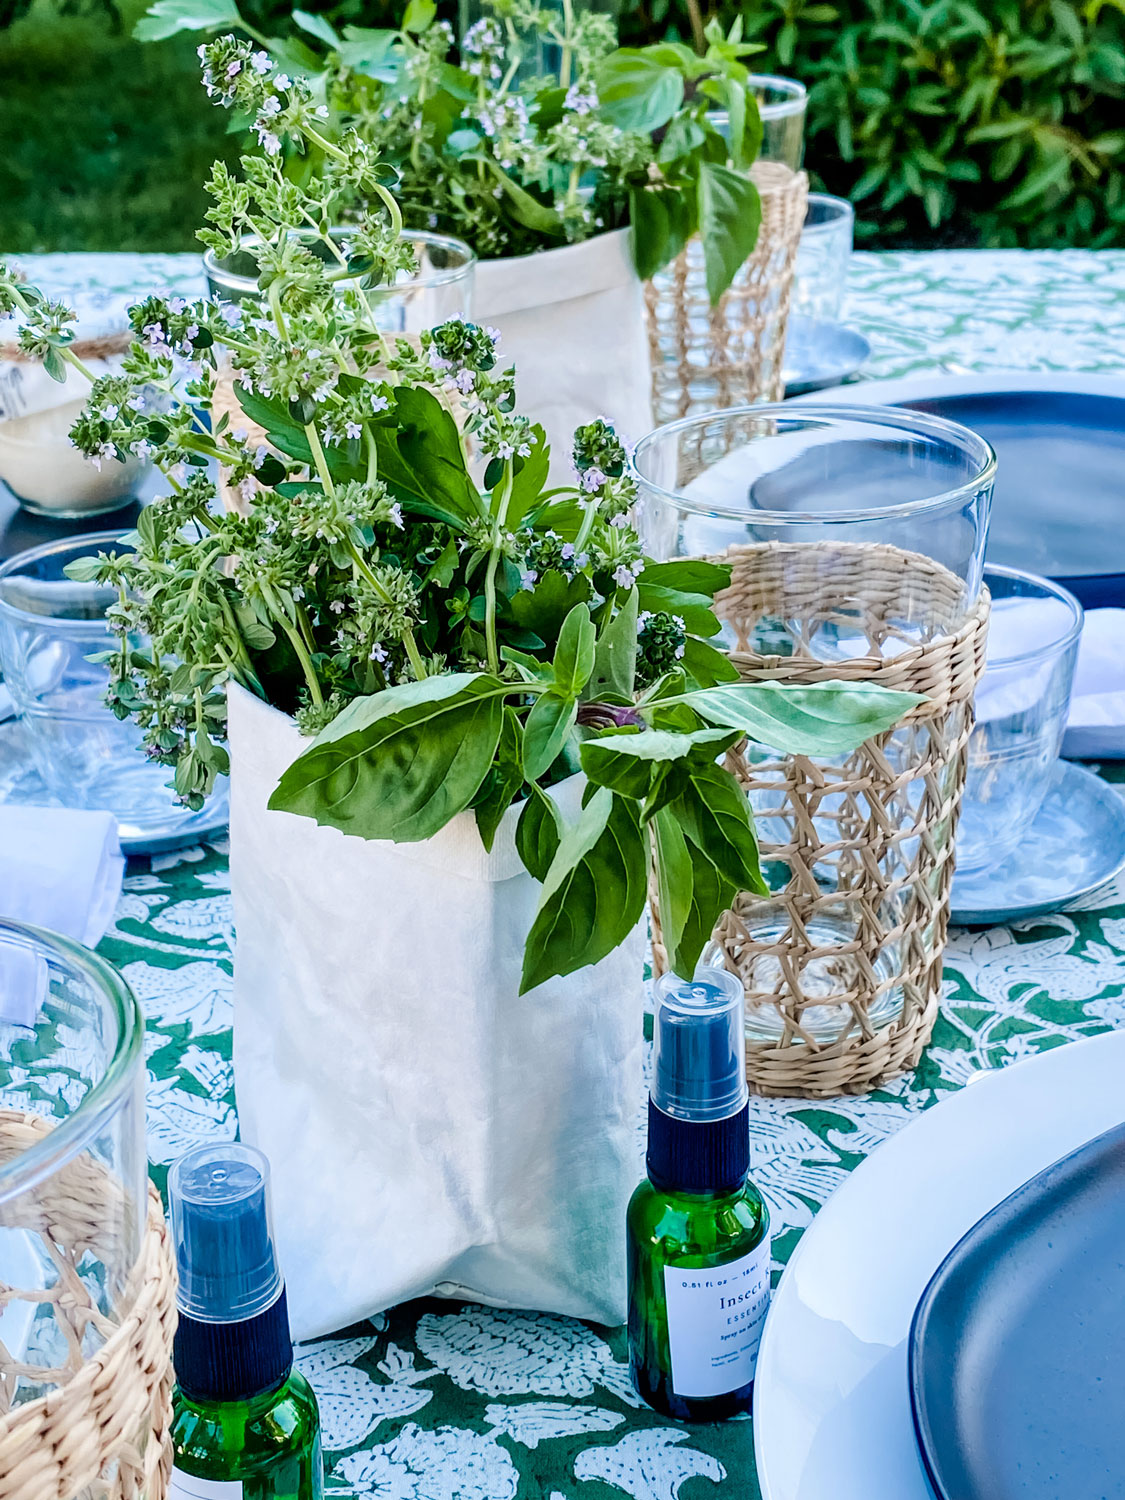 Small paper bags holding fresh herbs on the table as flowers 